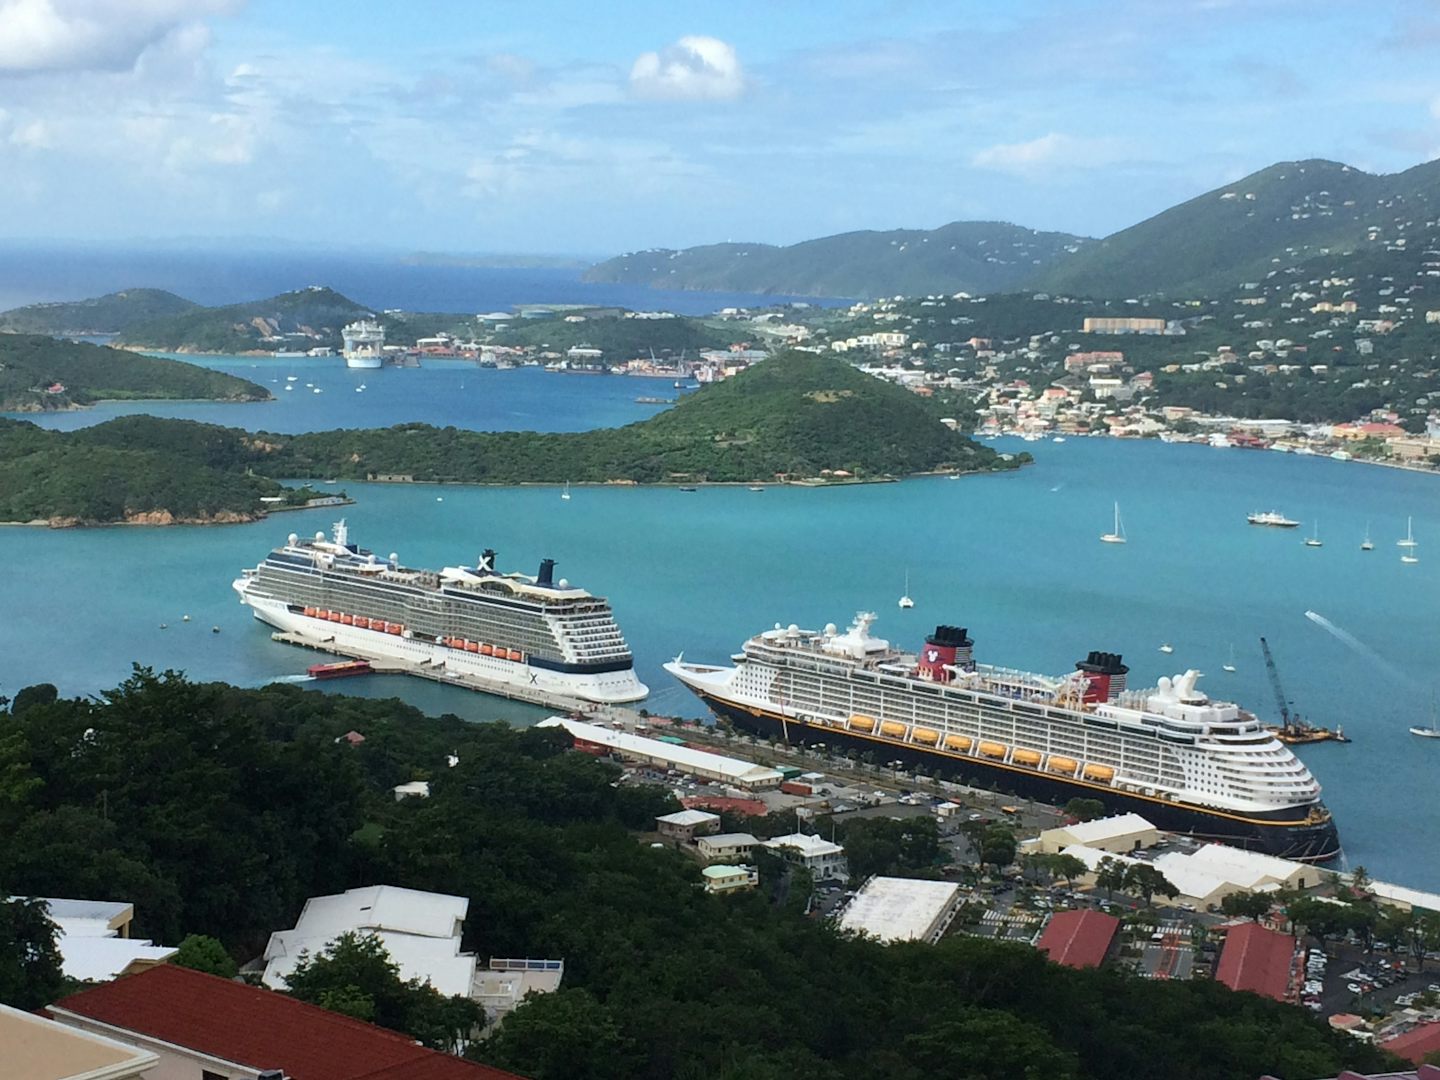 The view of our ship from Paradise Point in St. Thomas